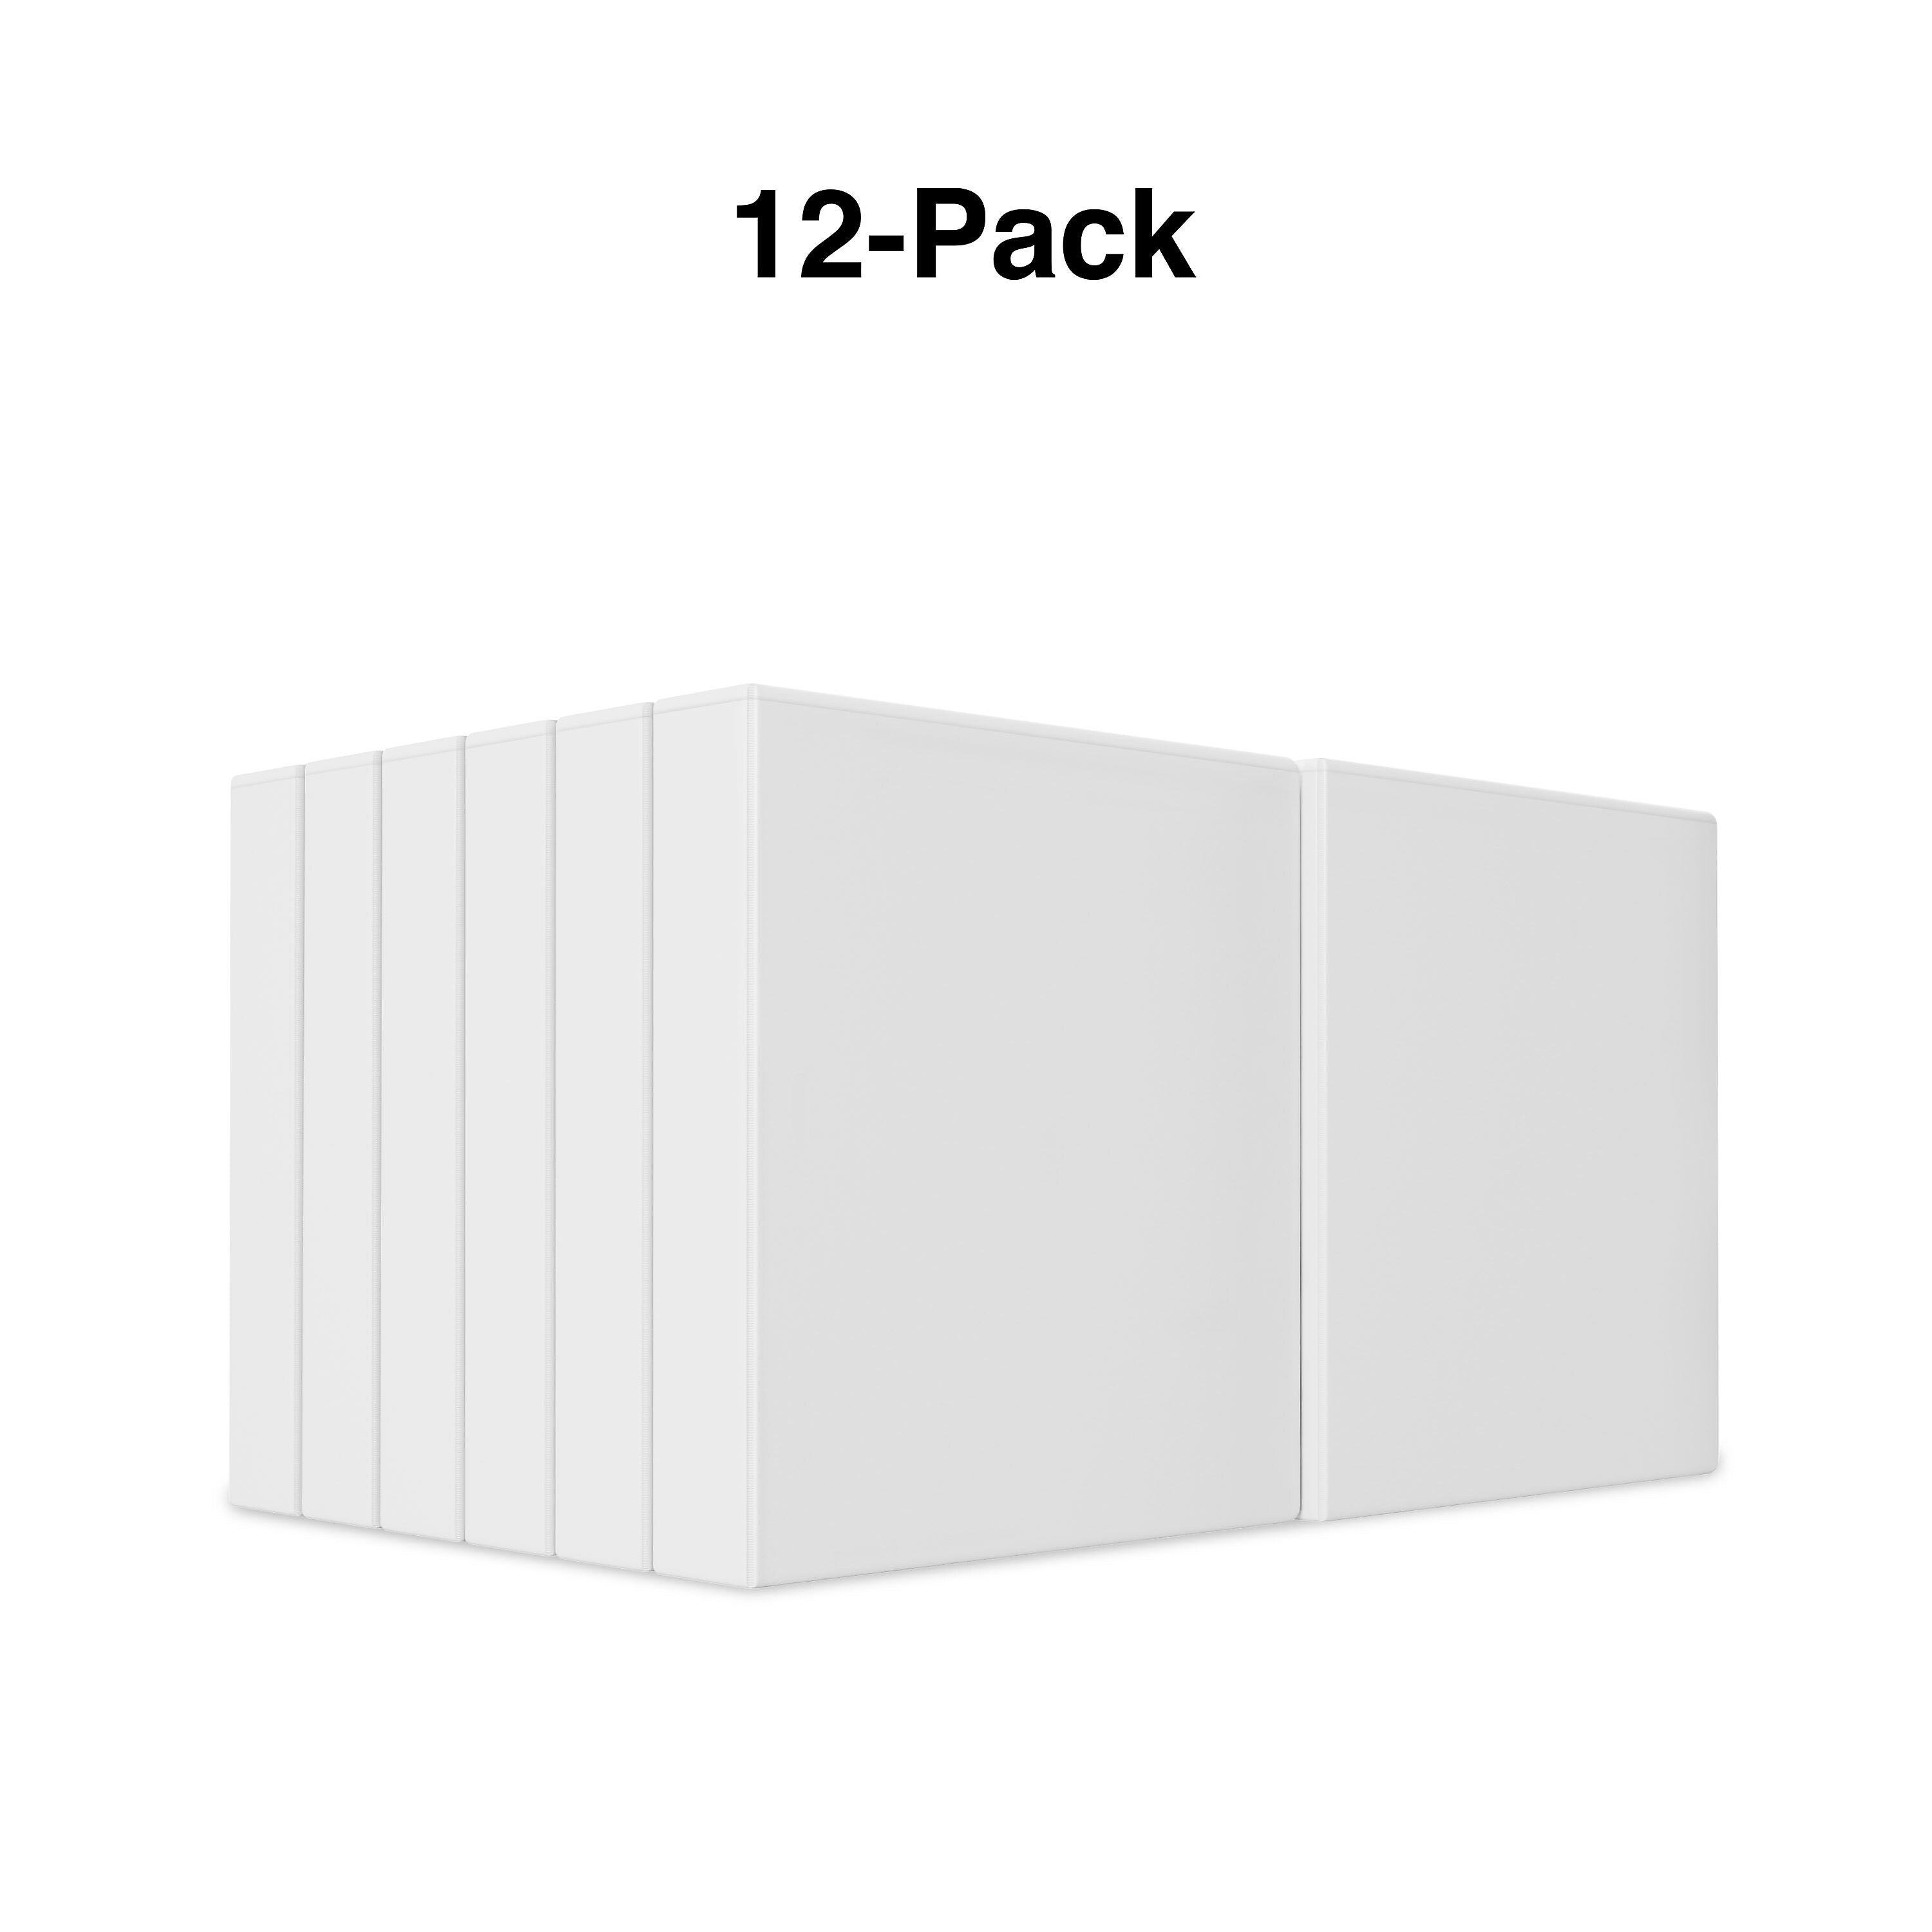 Staples 1 1/2" 3-Ring View Binders, White, 12/Pack